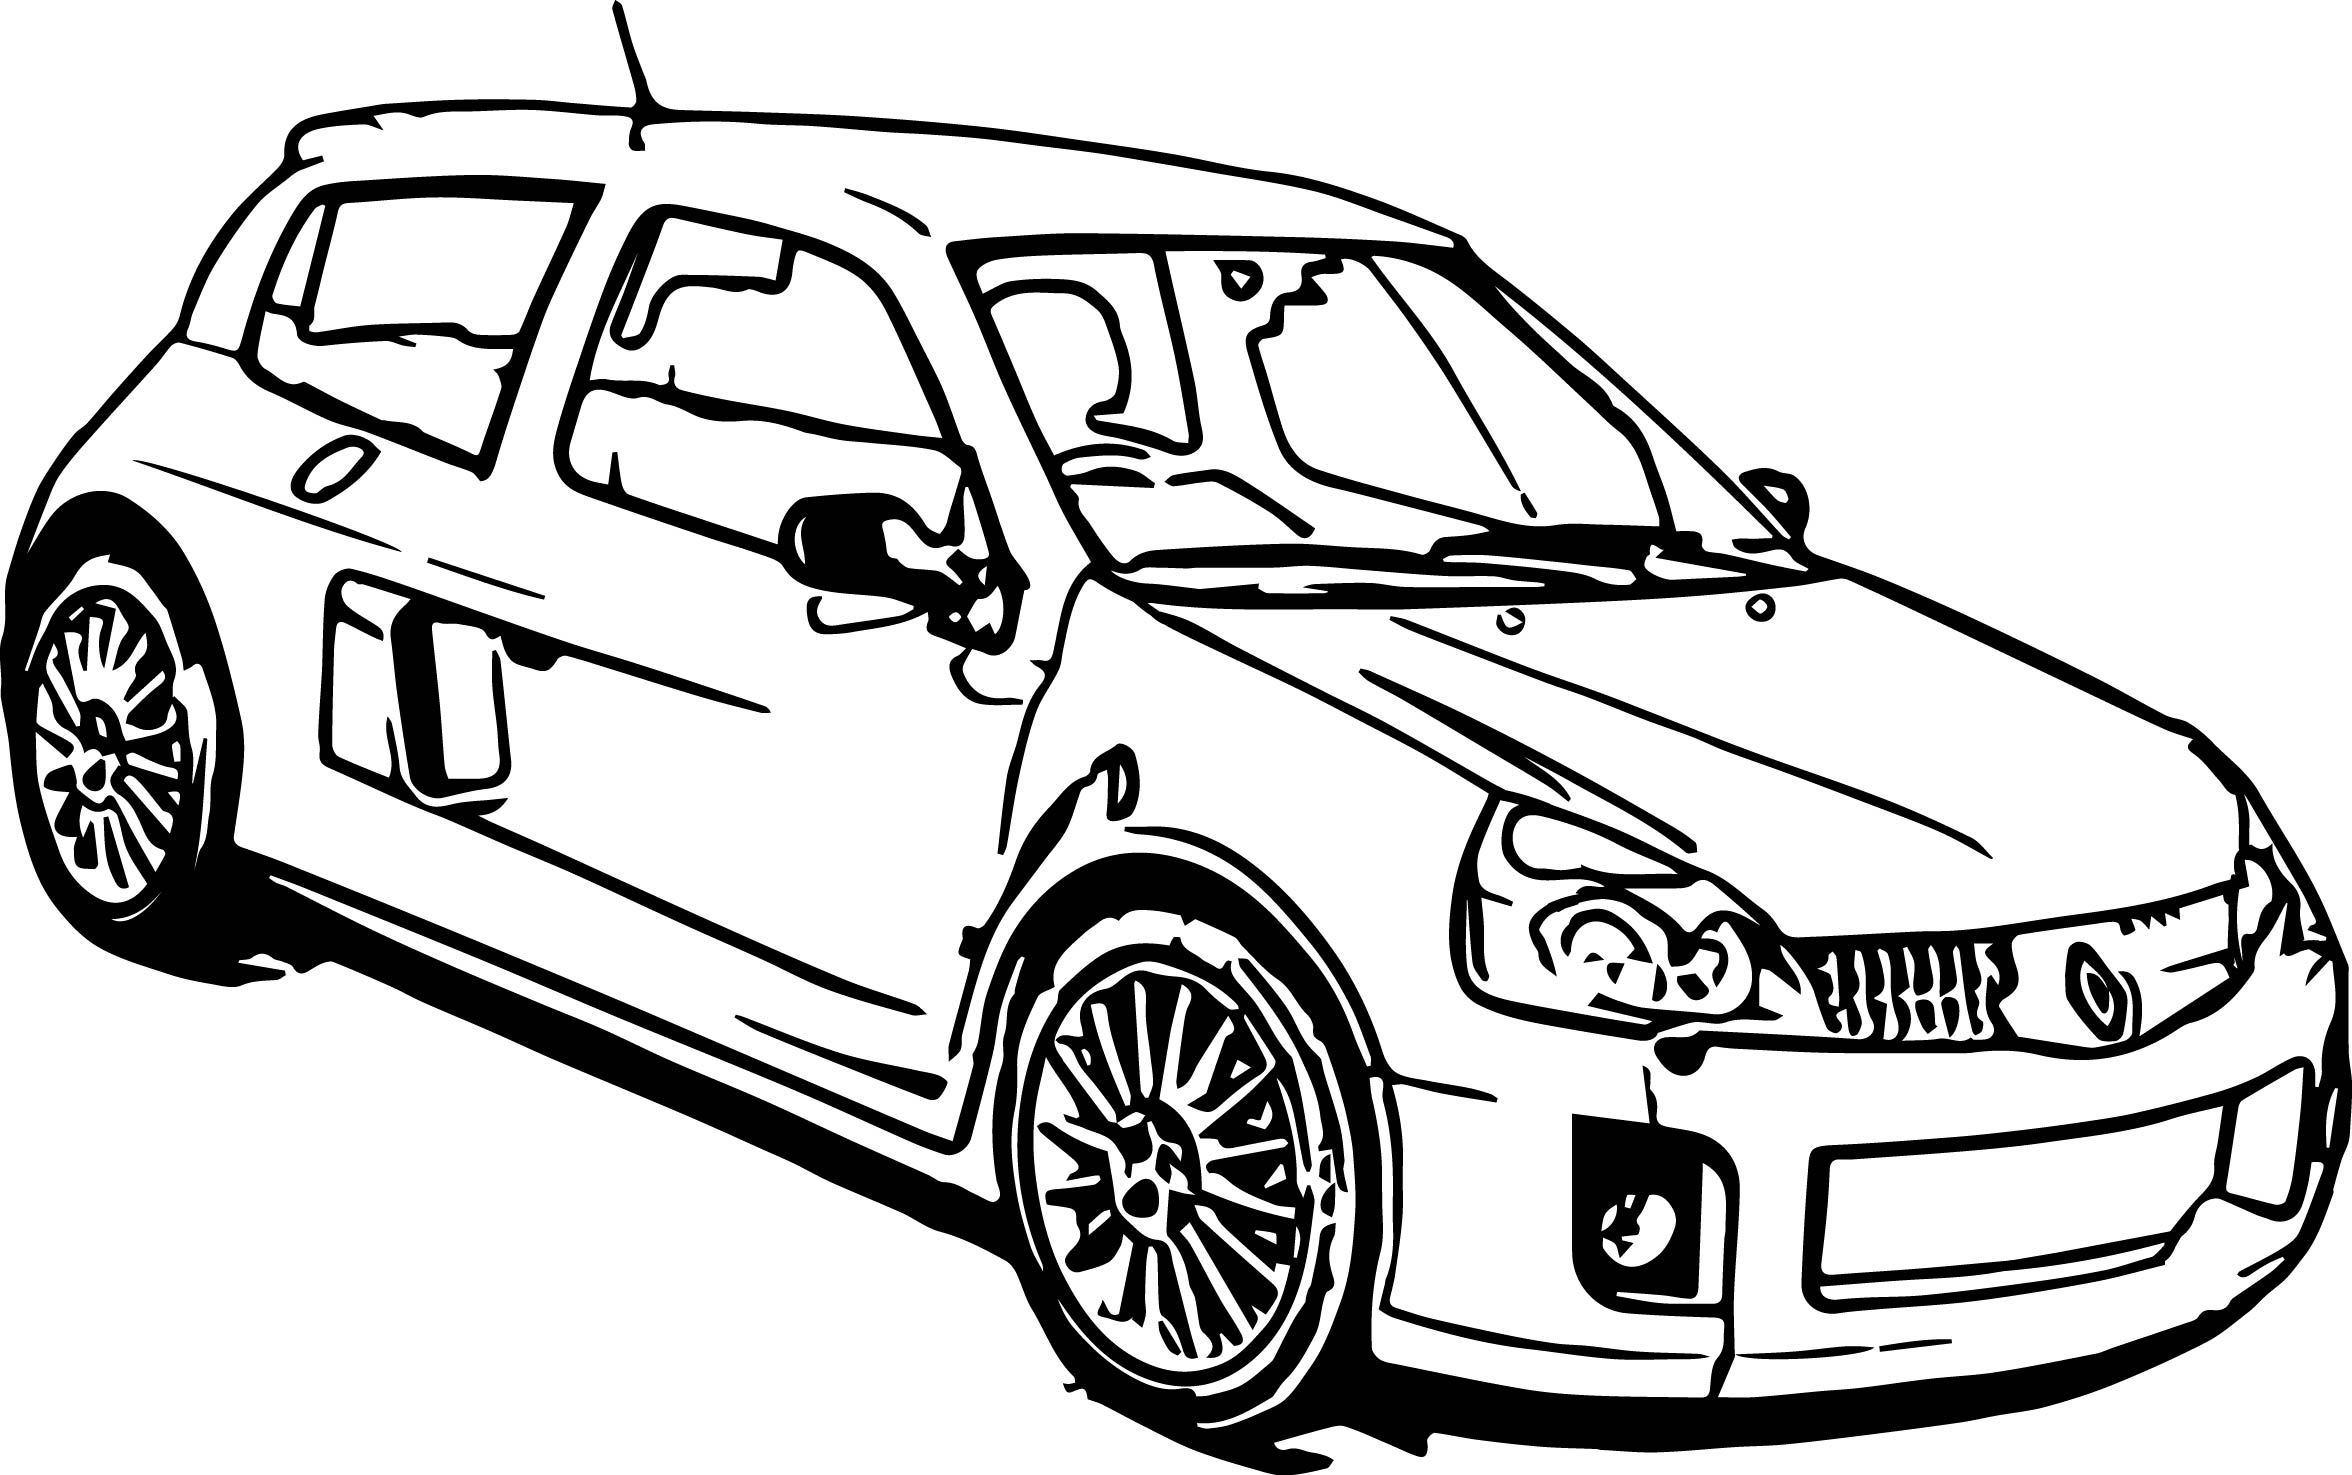 cool Car Renault Coloring Page ...